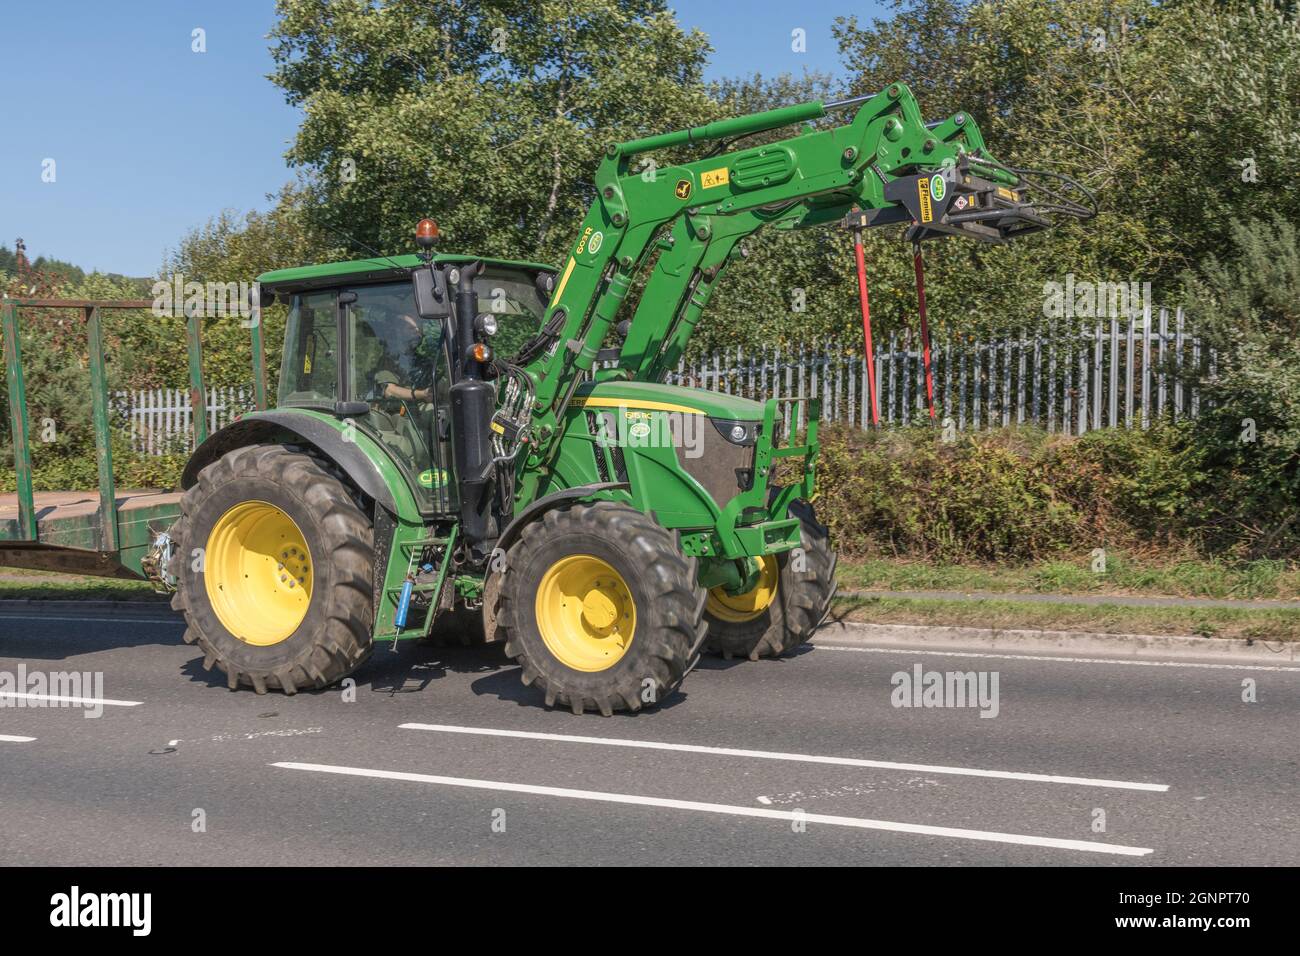 Familiar green John Deere farm tractor on open uphill rural country road, with trailer hitched. Large tyre Deere model is 6115 RC. Stock Photo